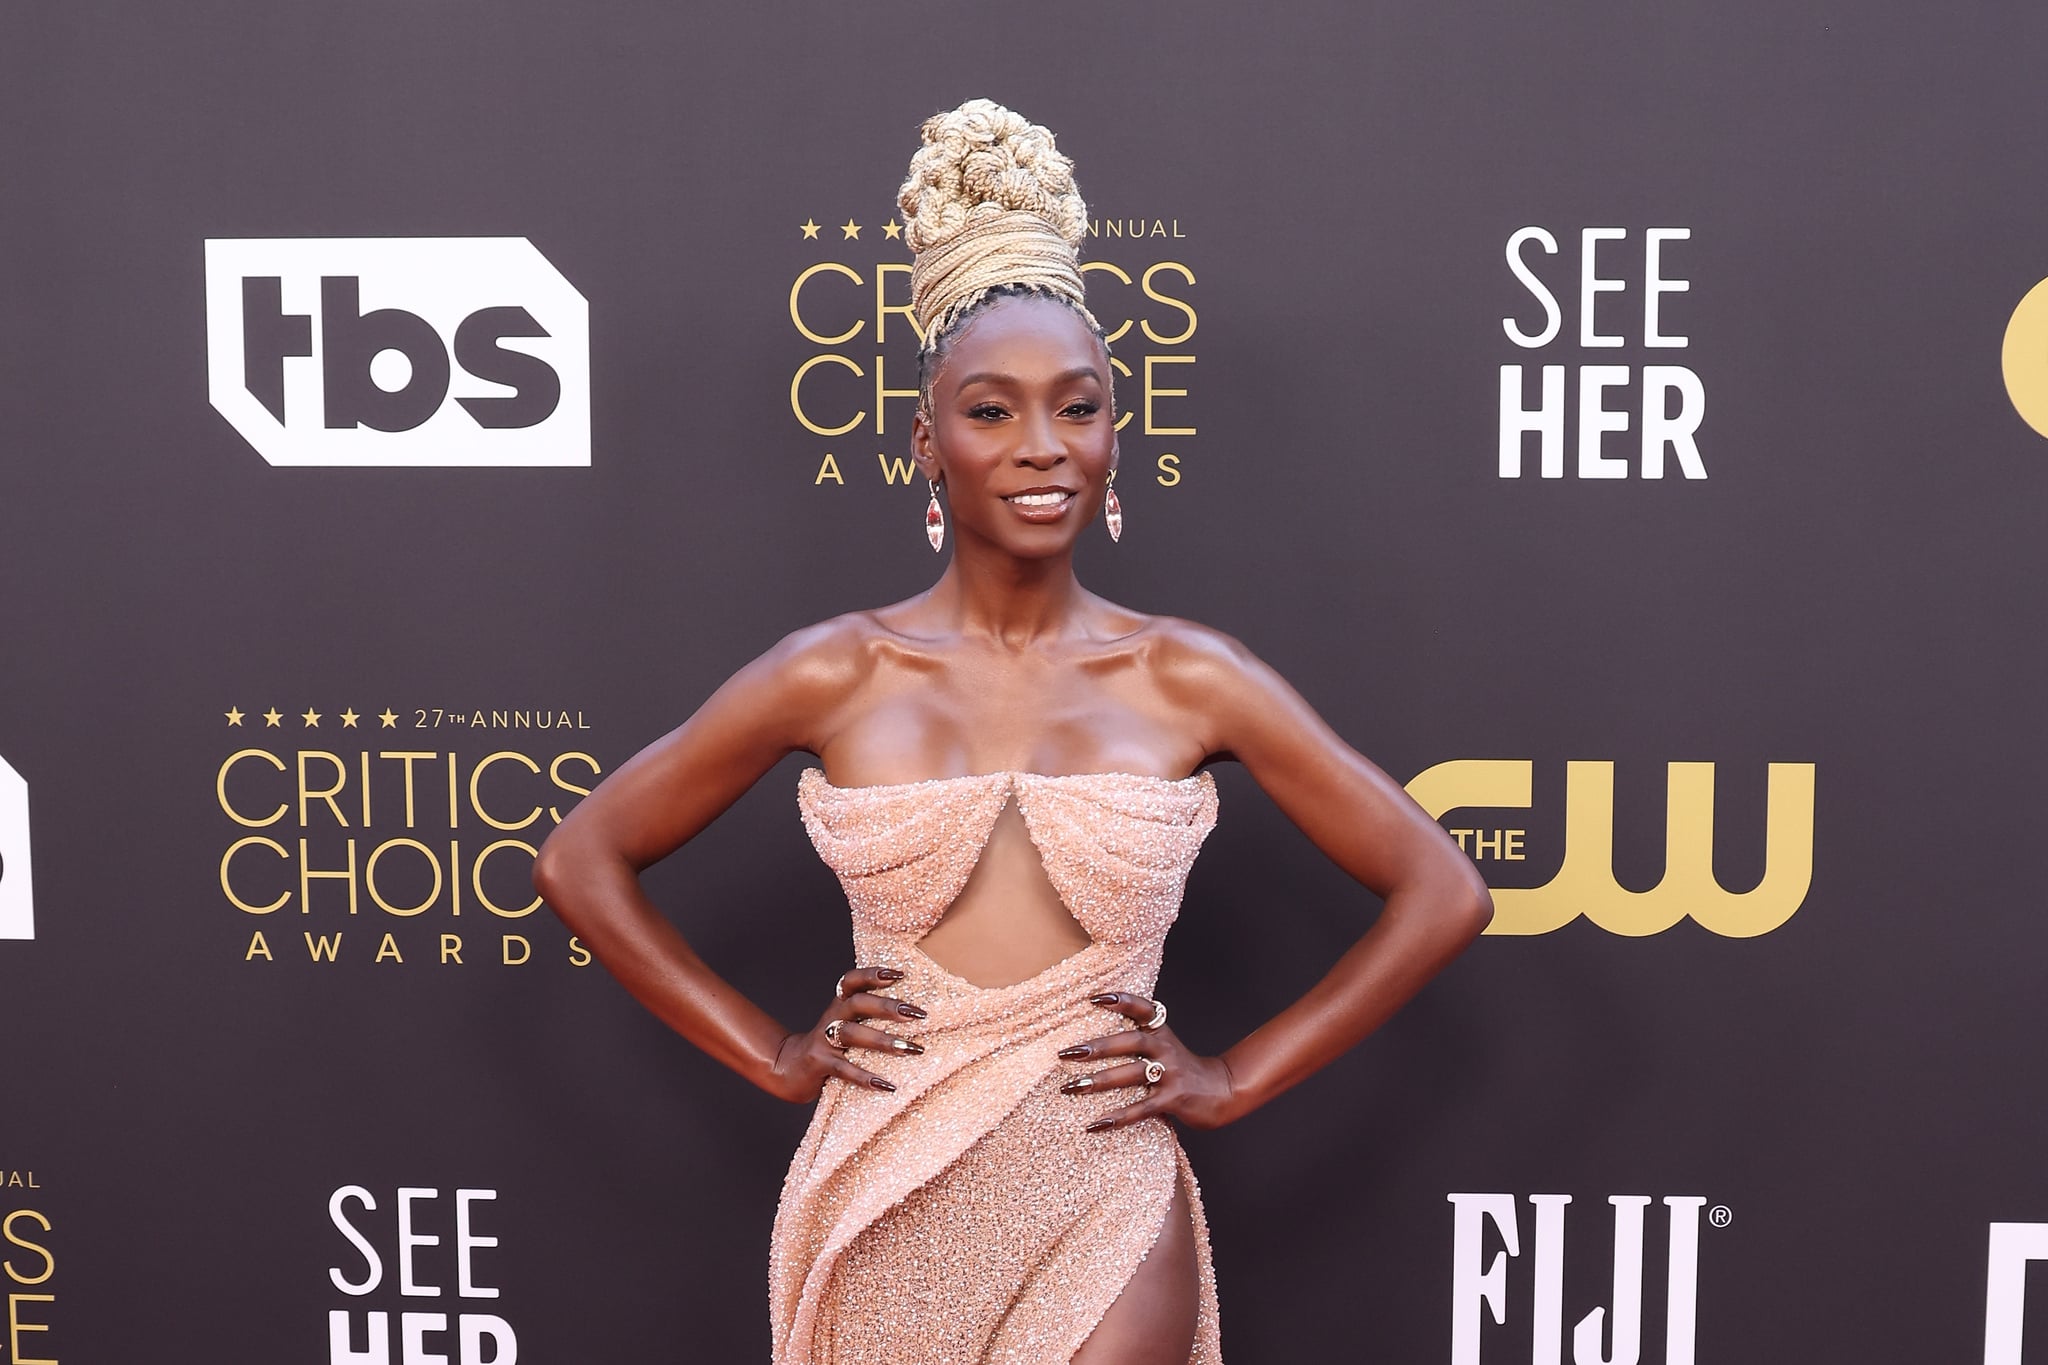 LOS ANGELES, CALIFORNIA - MARCH 13: Angelica Ross attends the 27th Annual Critics Choice Awards at Fairmont Century Plaza on March 13, 2022 in Los Angeles, California. (Photo by Taylor Hill/FilmMagic)